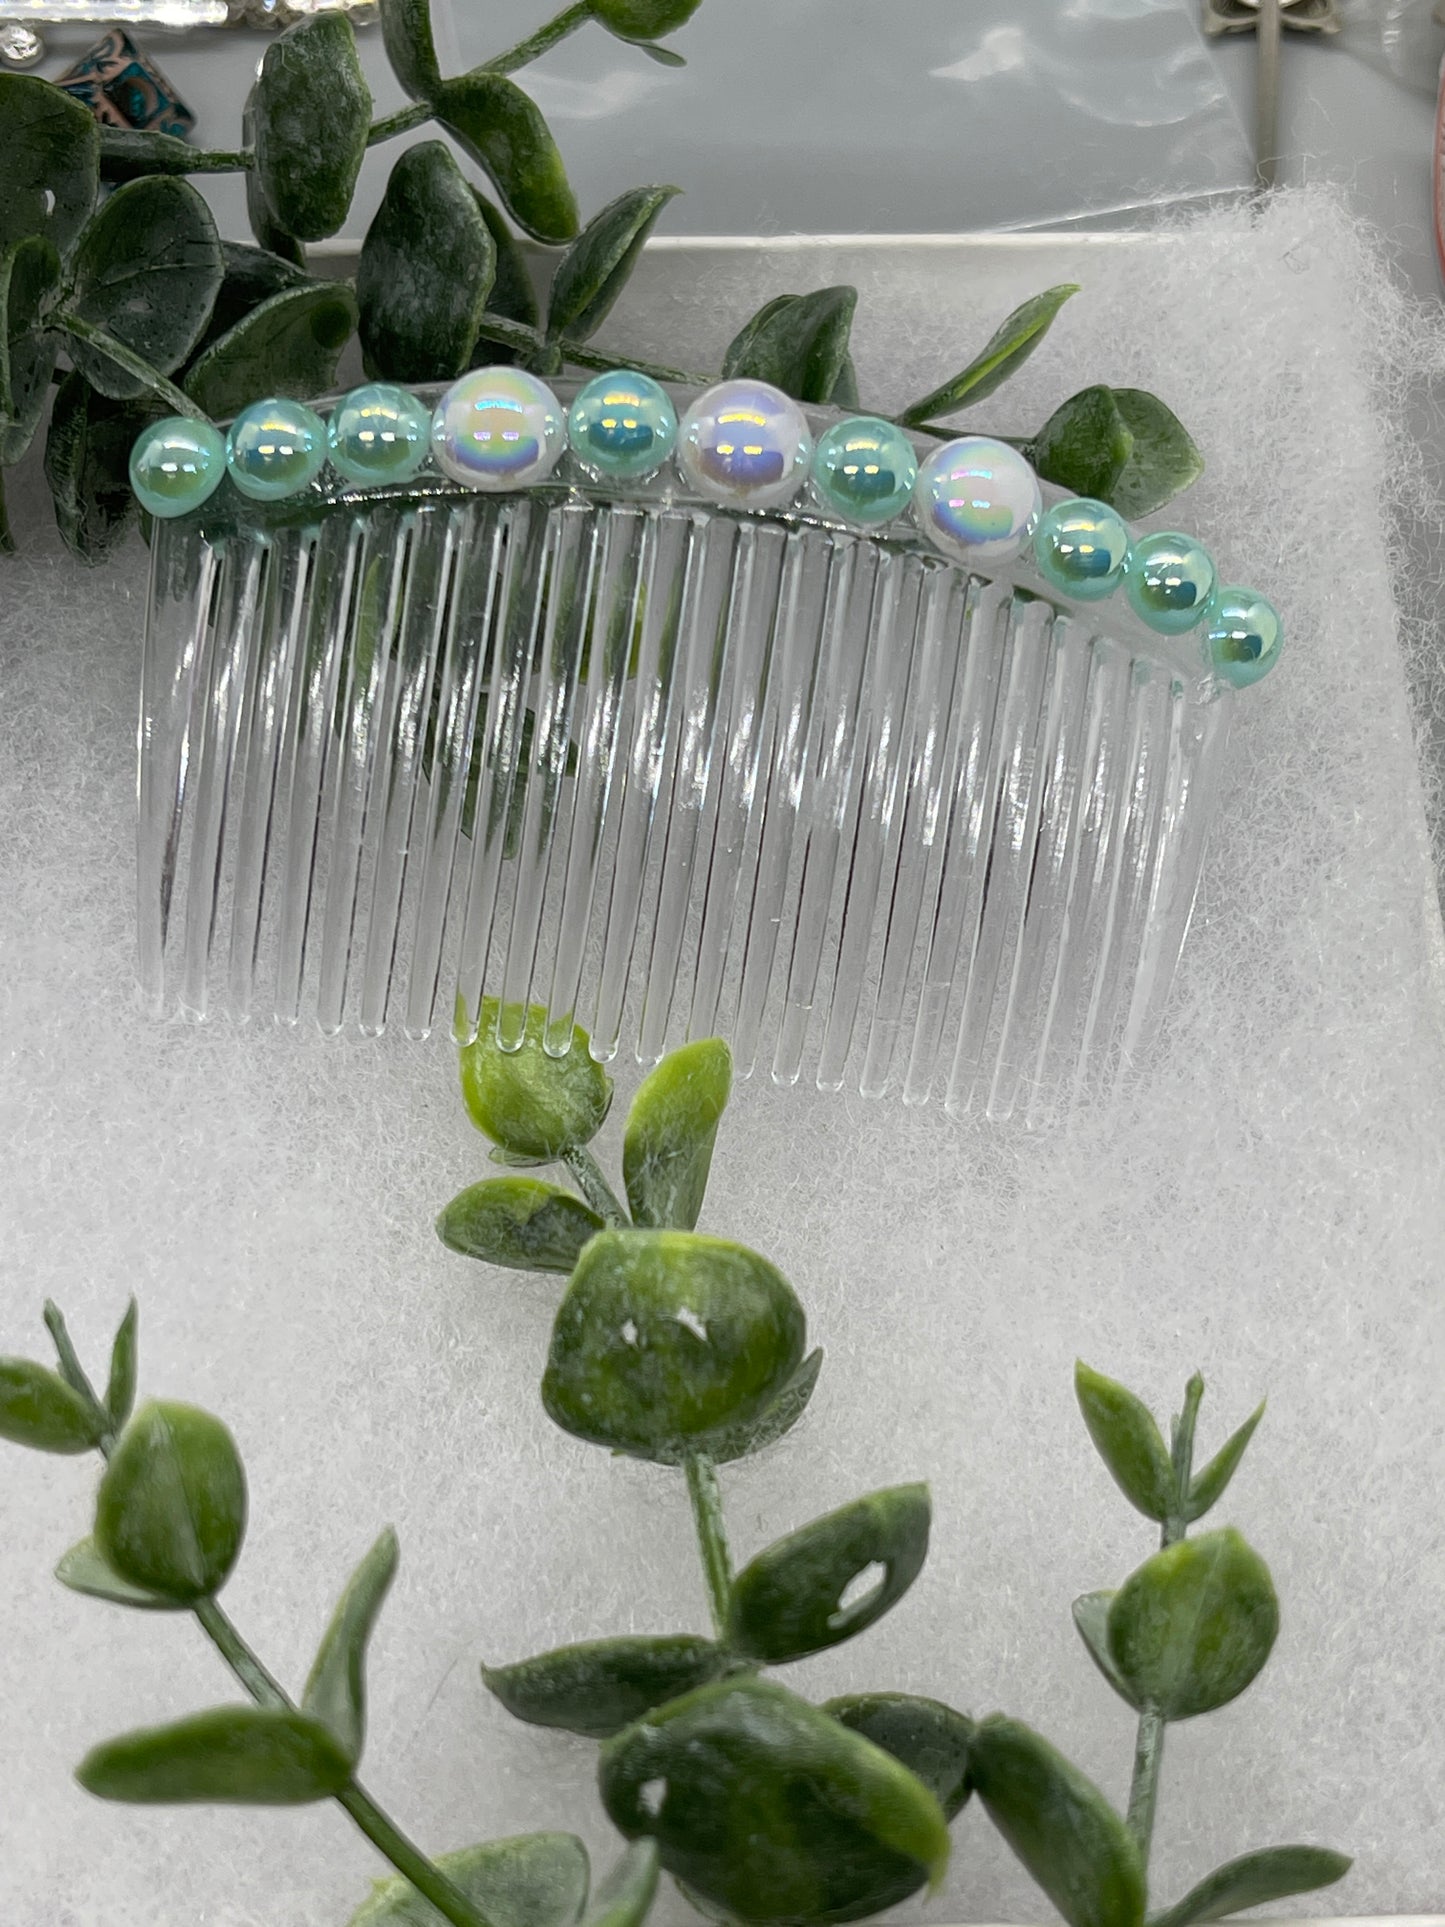 Iridescent light teal  white faux pearl side comb 3.5” clear  plastic hair accessory bridal wedding Retro Bridal Party Prom Birthday gifts